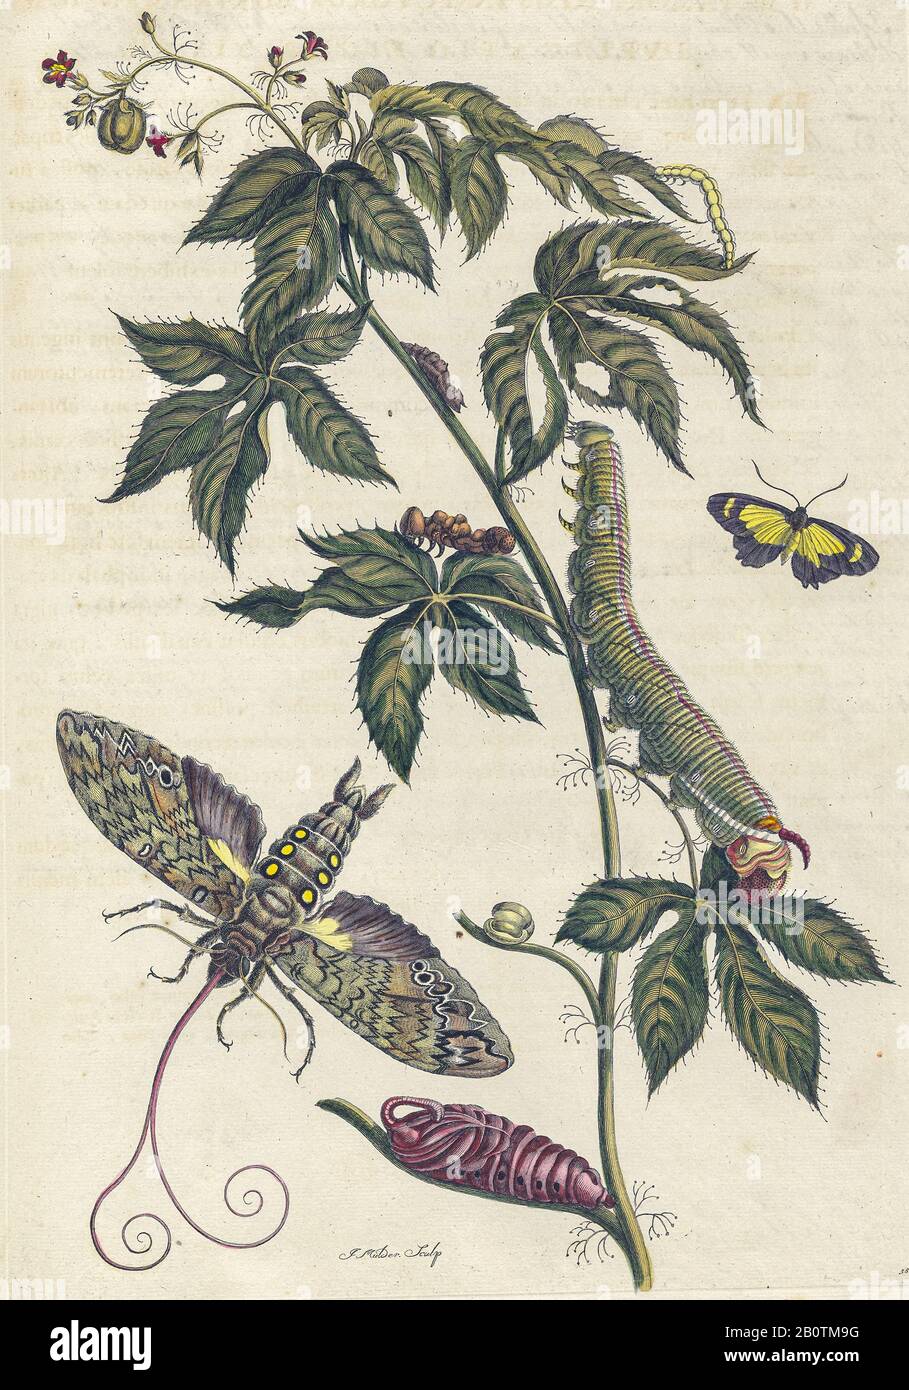 Plant and butterfly from Metamorphosis insectorum Surinamensium (Surinam insects) a hand coloured 18th century Book by Maria Sibylla Merian published in Amsterdam in 1719 Stock Photo